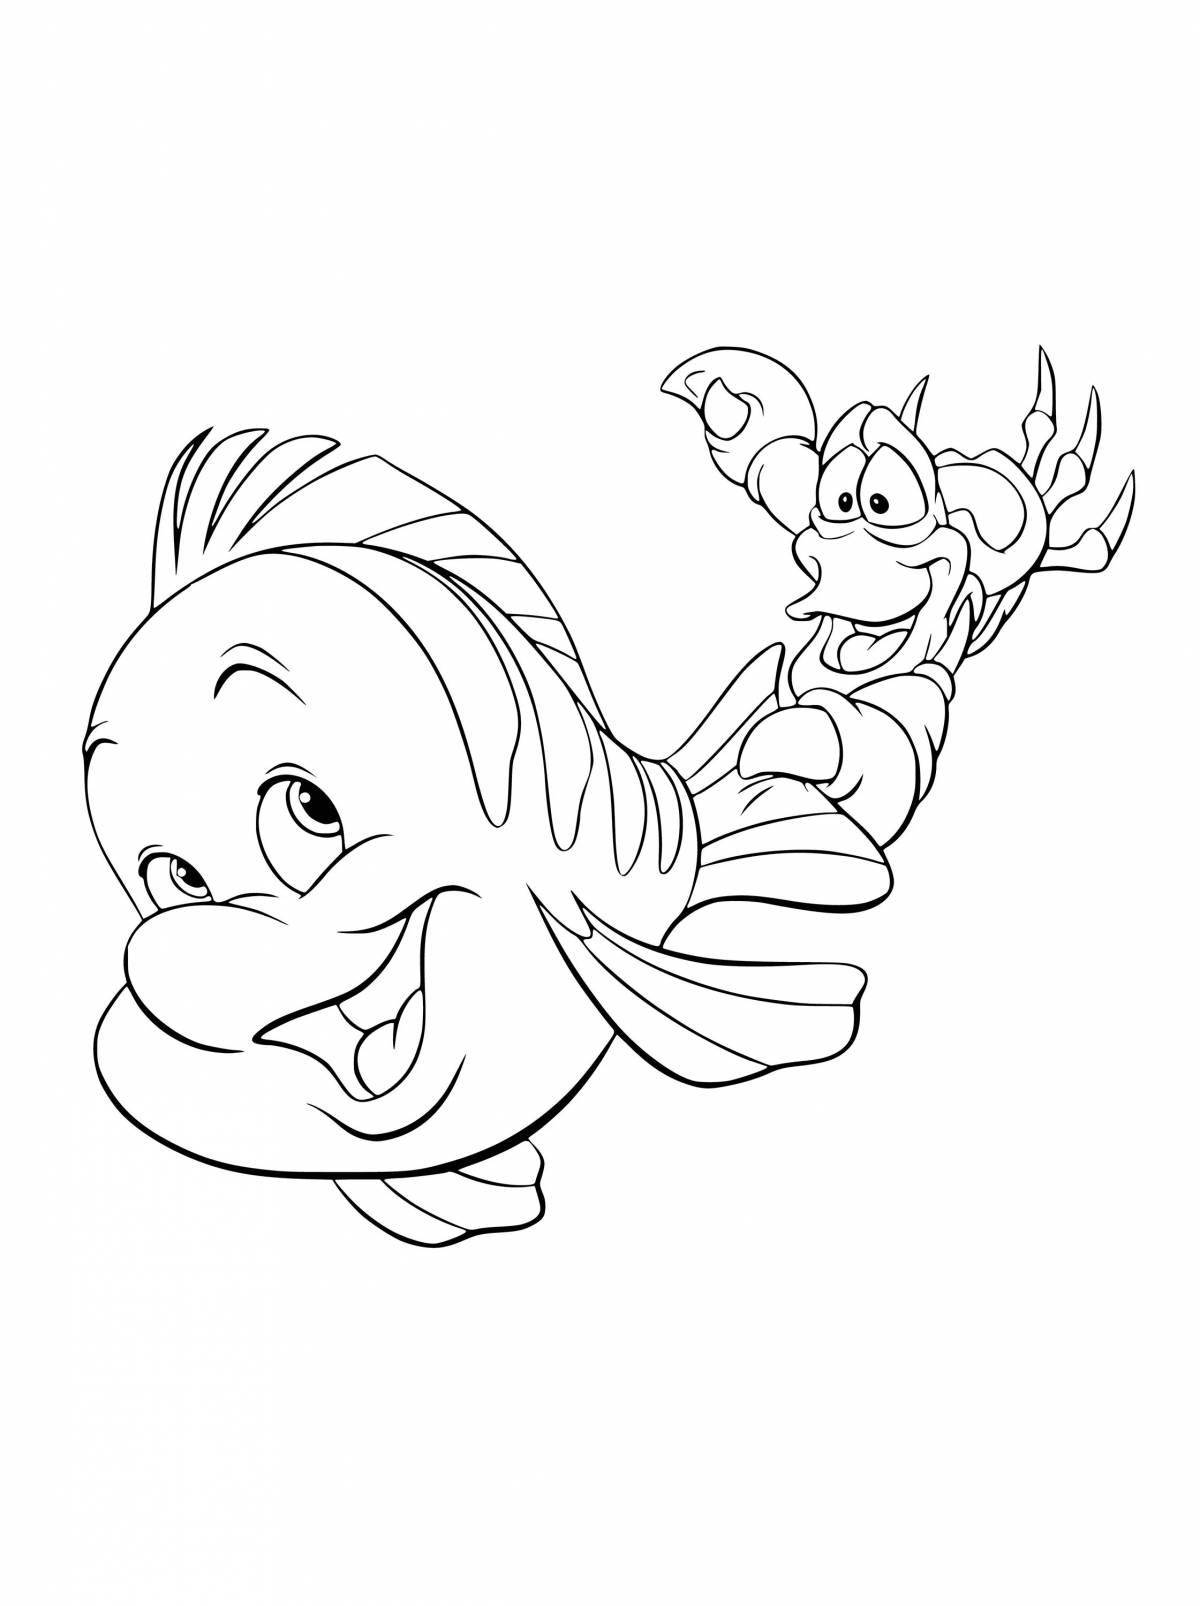 Colorful float coloring page